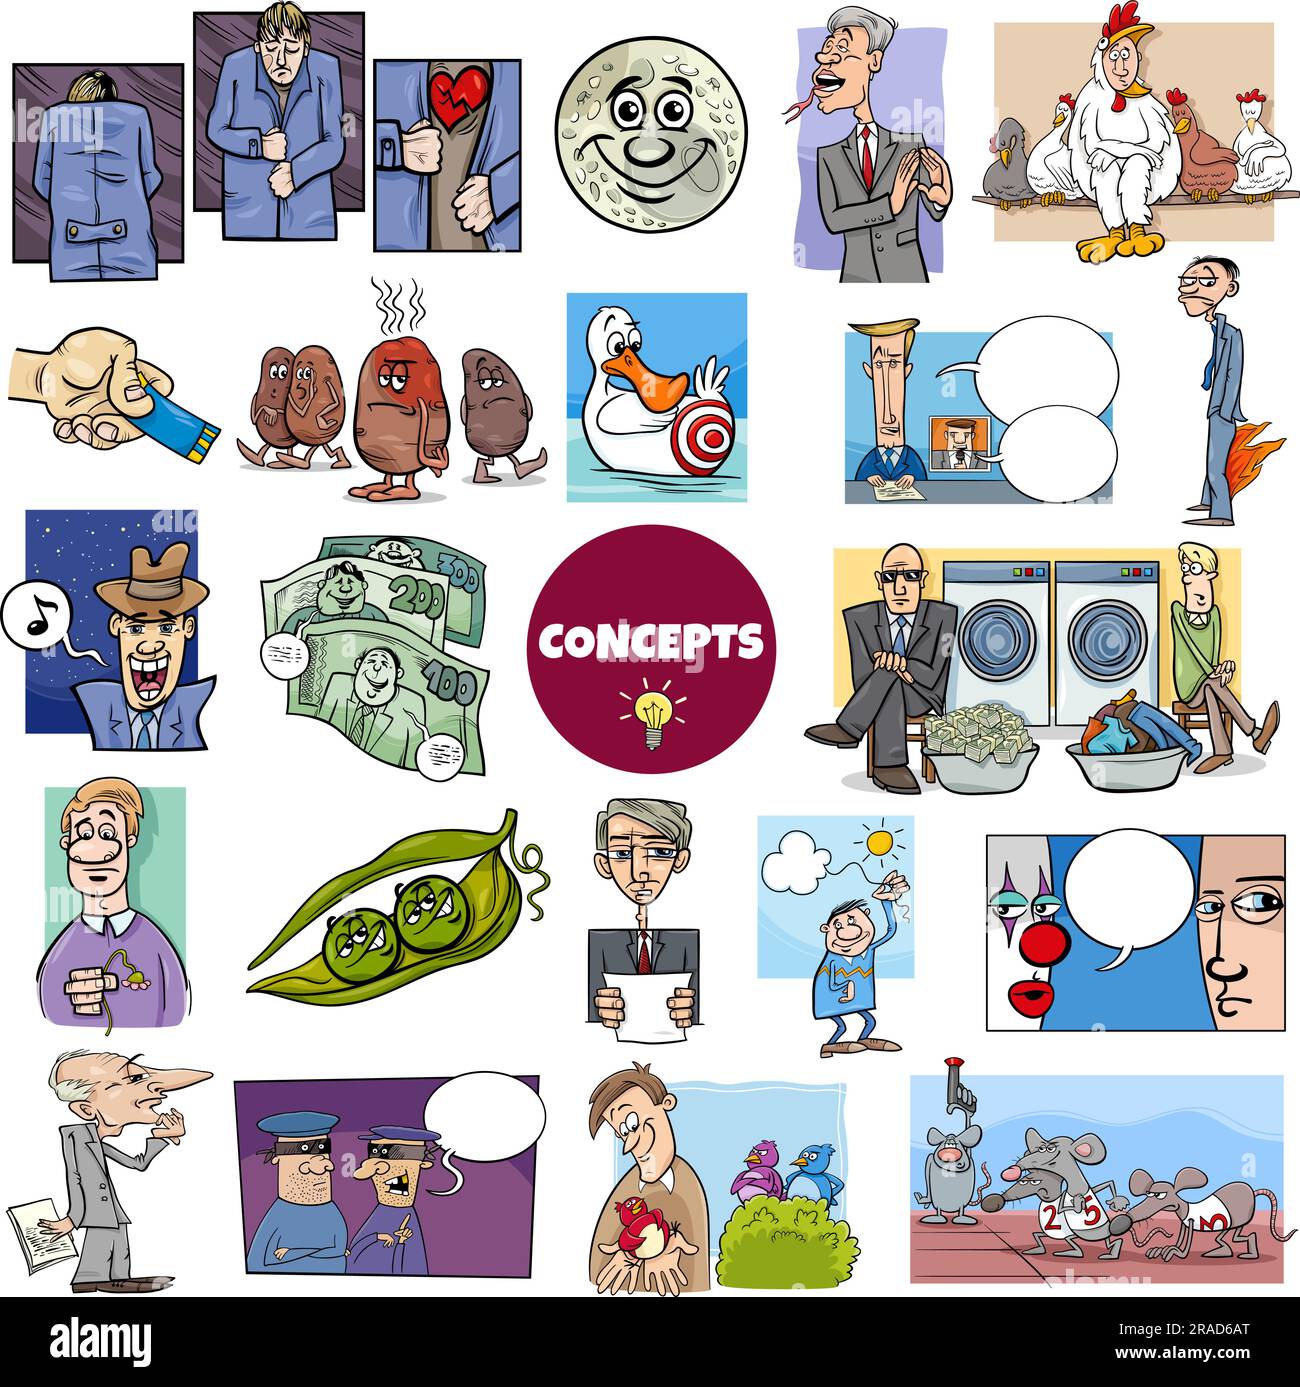 Illustration big set of humorous cartoon concepts or metaphors and ideas with comic characters Stock Vector